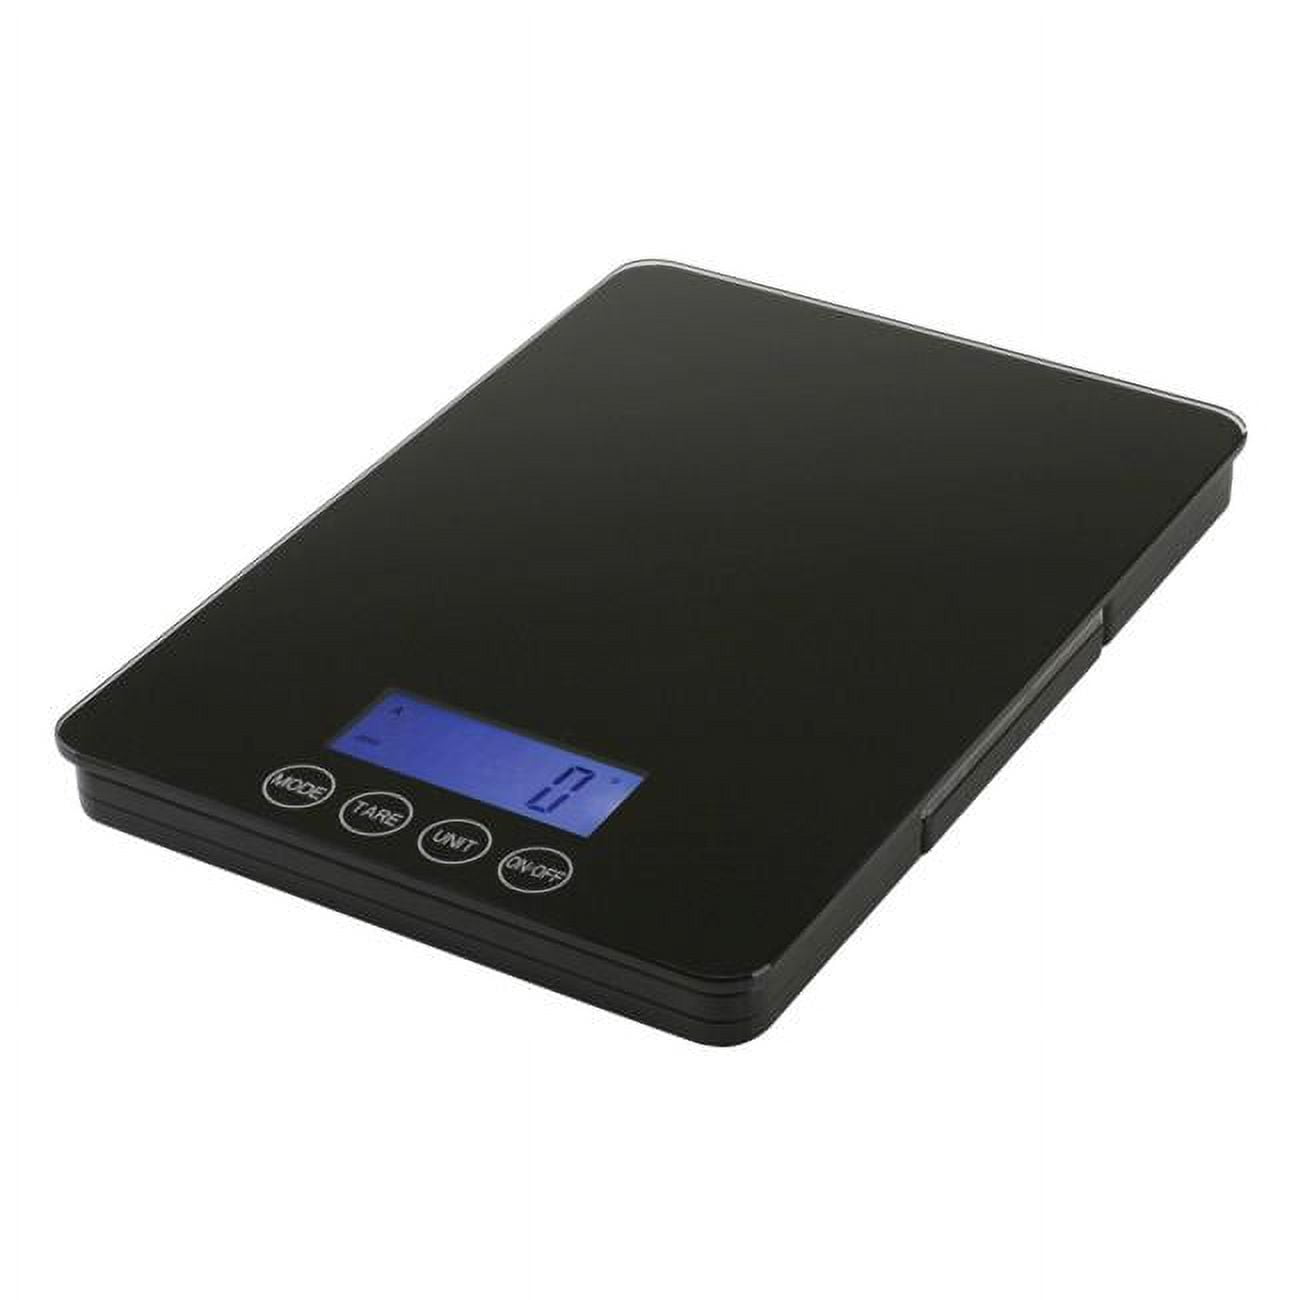 Picture of American Weigh Scales DK-5K 5-1 kg x 1-0.1 g Dual Kitchen Scale